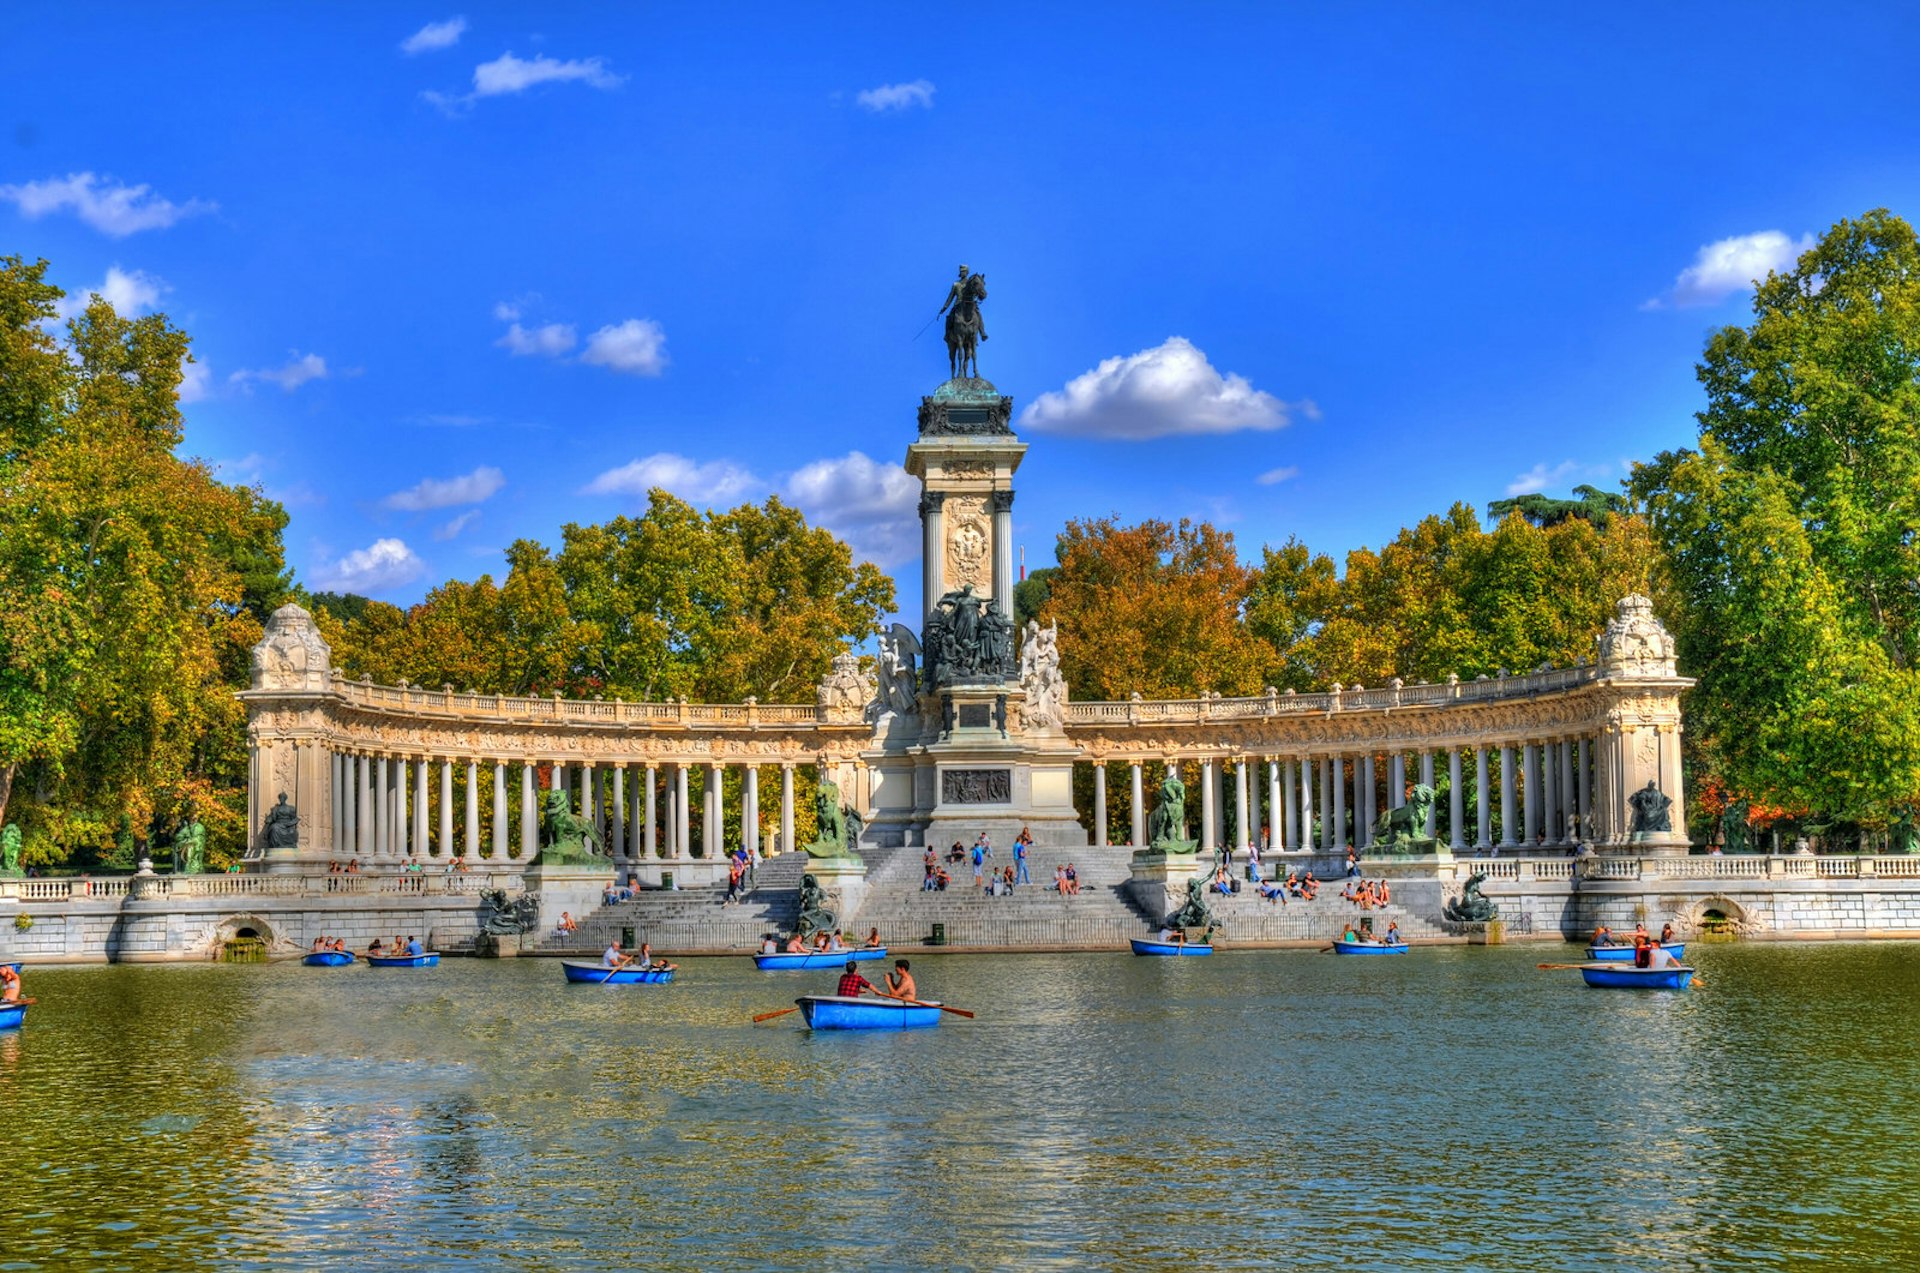 People in boats by the Monument to Alfonso XII in Madrid's Parque del Buen Retiro